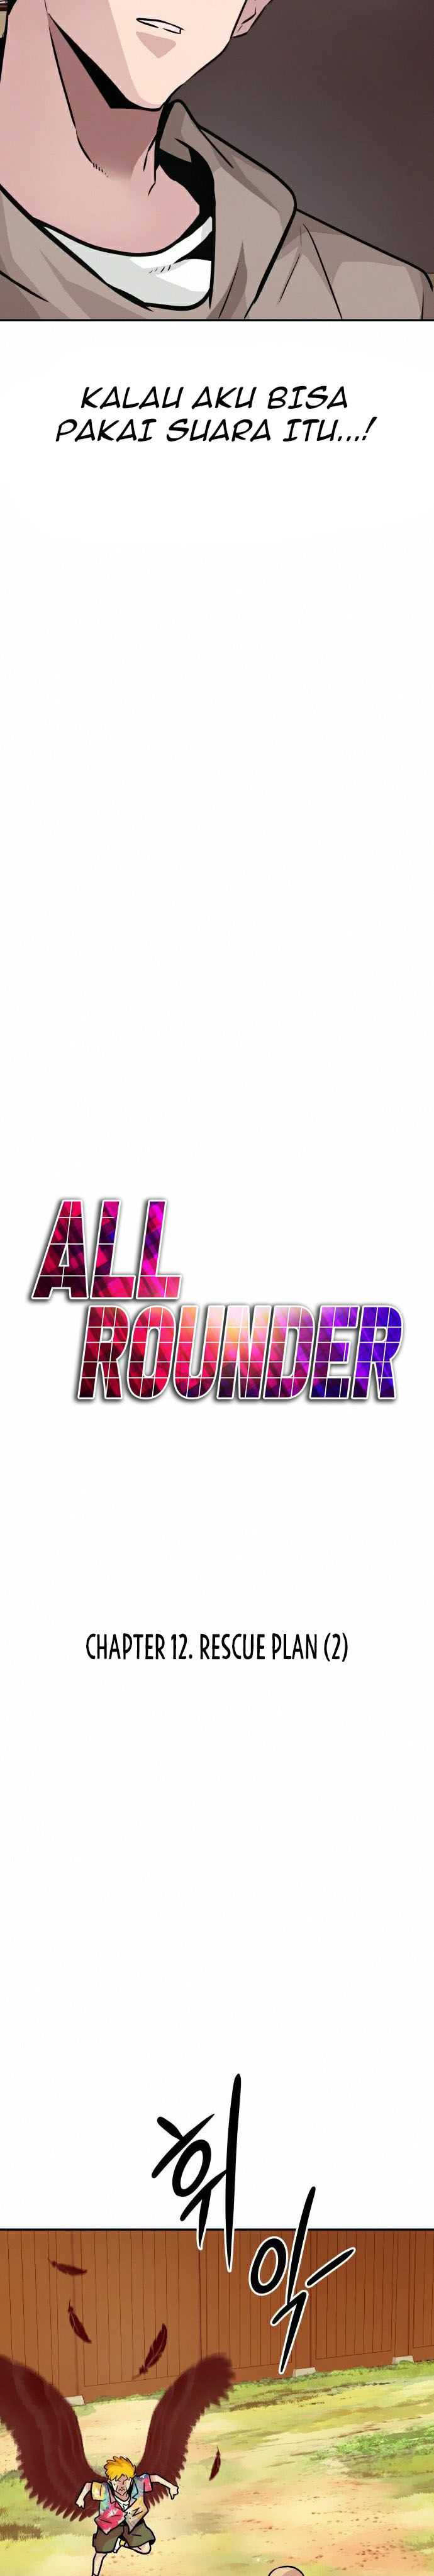 All Rounder Chapter 12